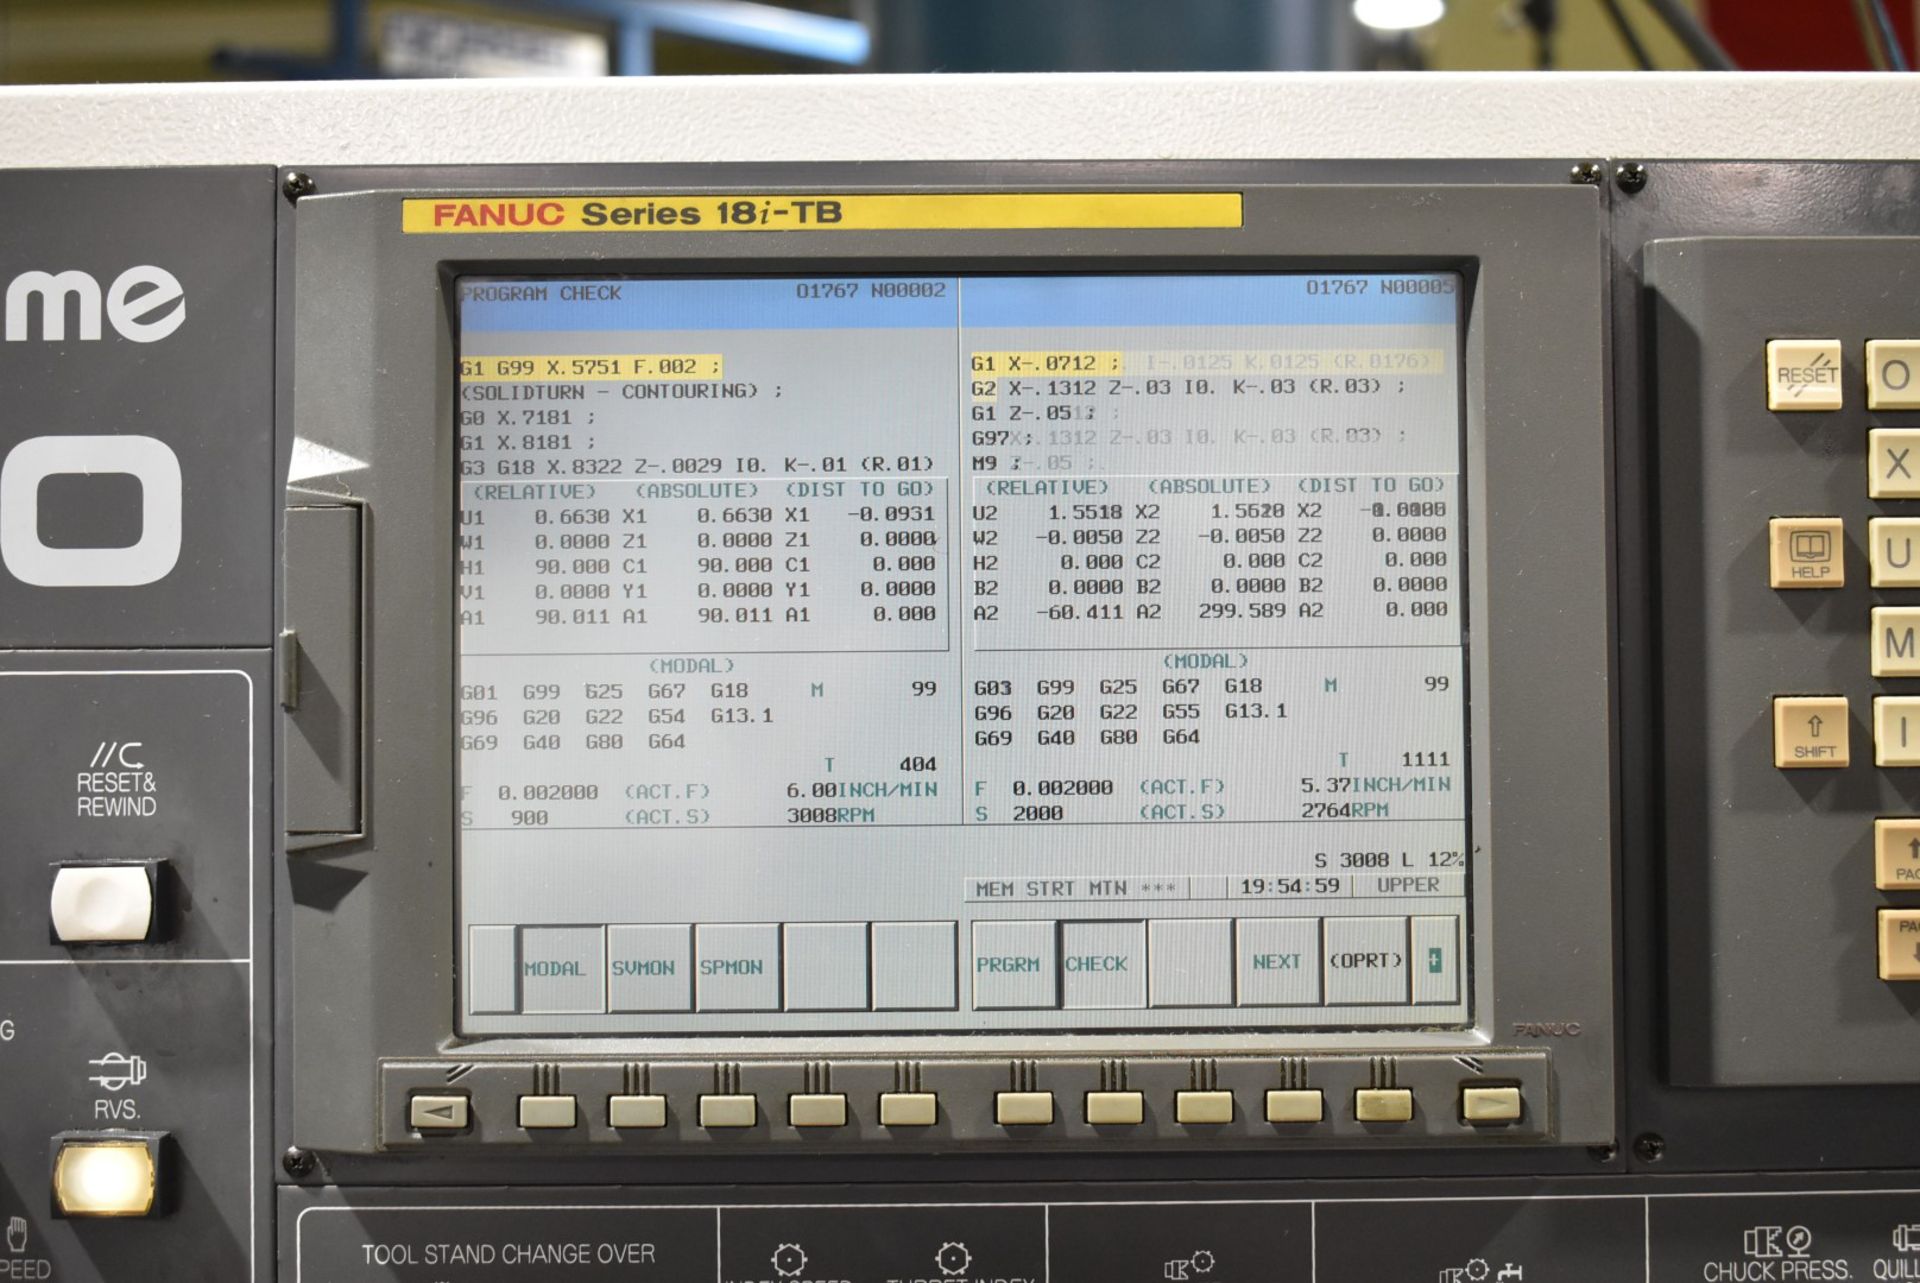 NAKAMURA-TOME (2006) WT-150 MMYS MULTI-AXIS OPPOSED SPINDLE AND TWIN TURRET CNC MULTI-TASKING CENTER - Image 9 of 15